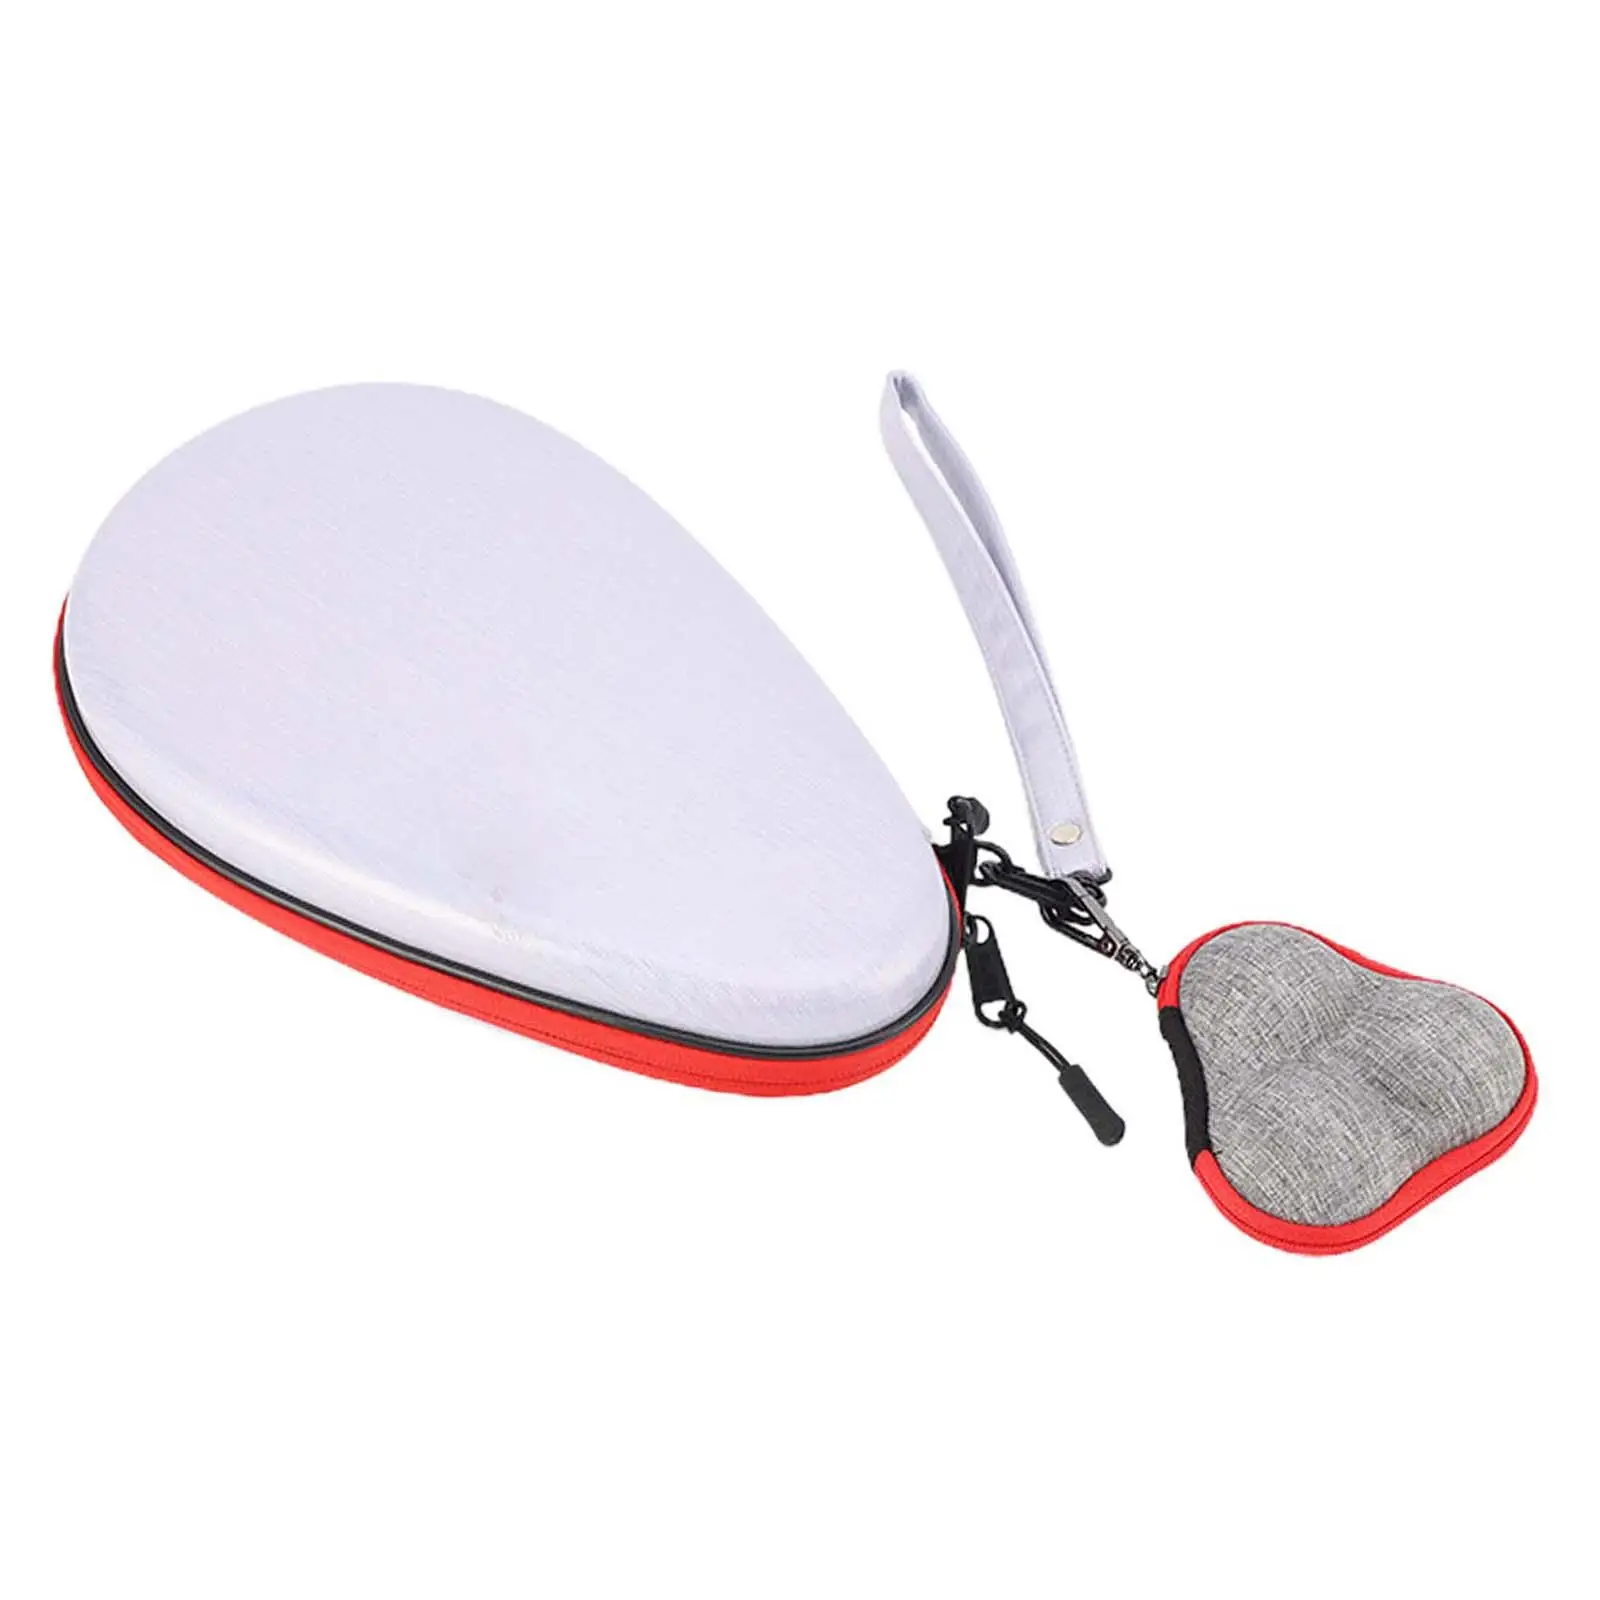 Pingpong Paddle Case with Ball Bag Reusable Portable Wear Resistant Tennis Racket Case for Sportsman Unisex Adult Training